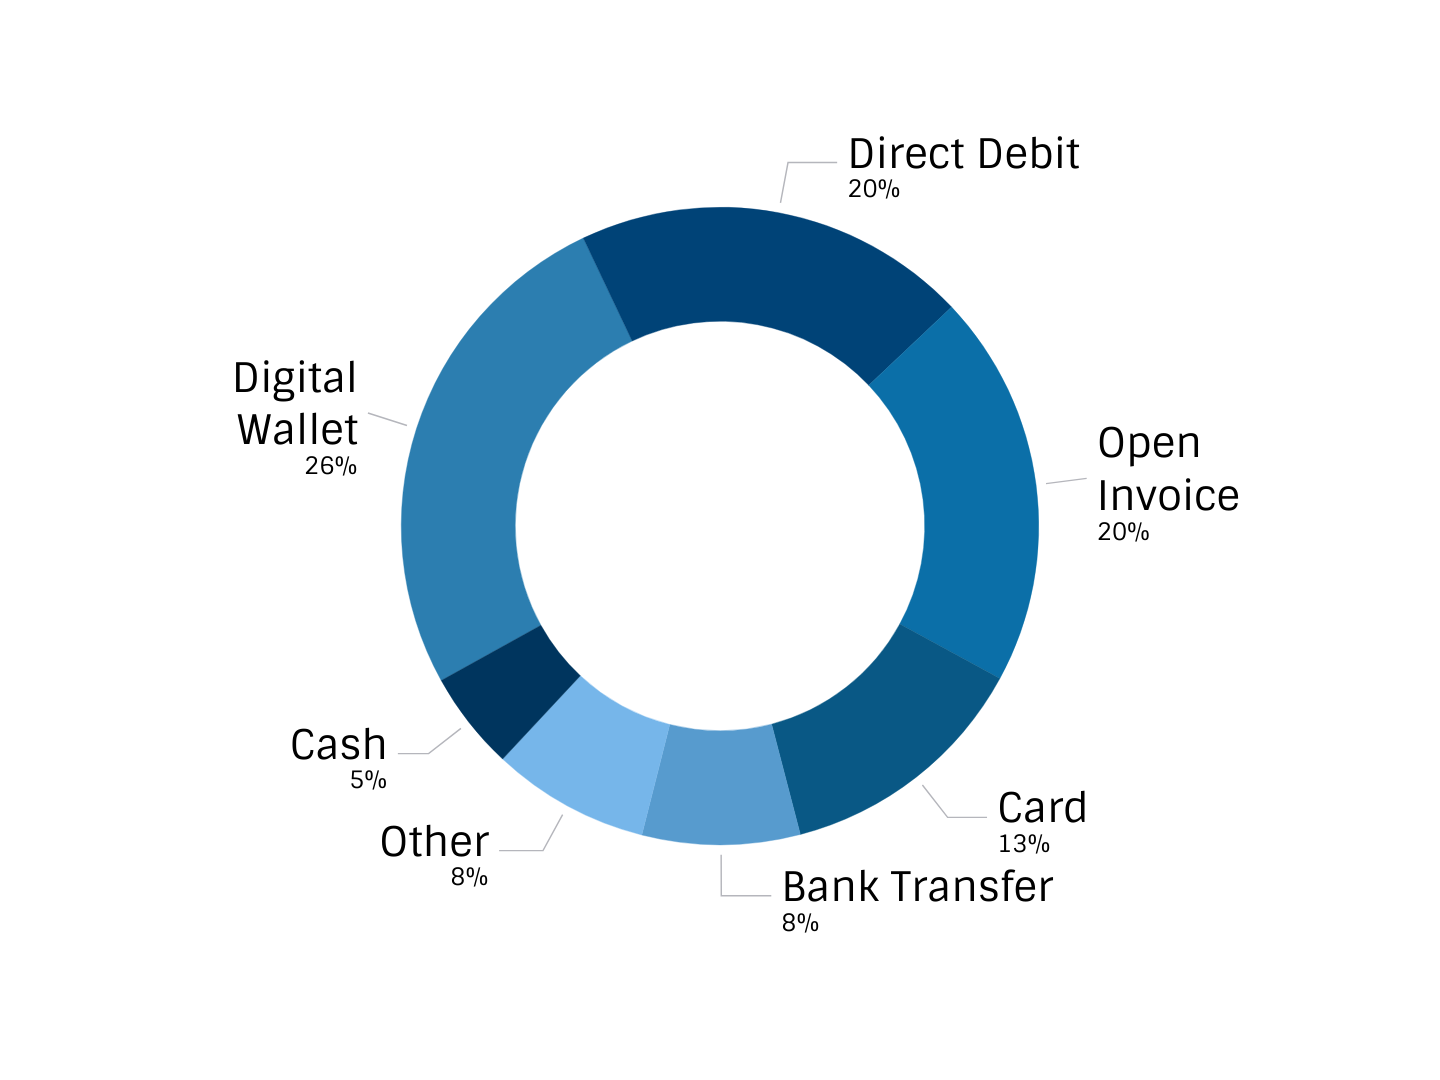 A pie chart showing the top payment methods split by value.